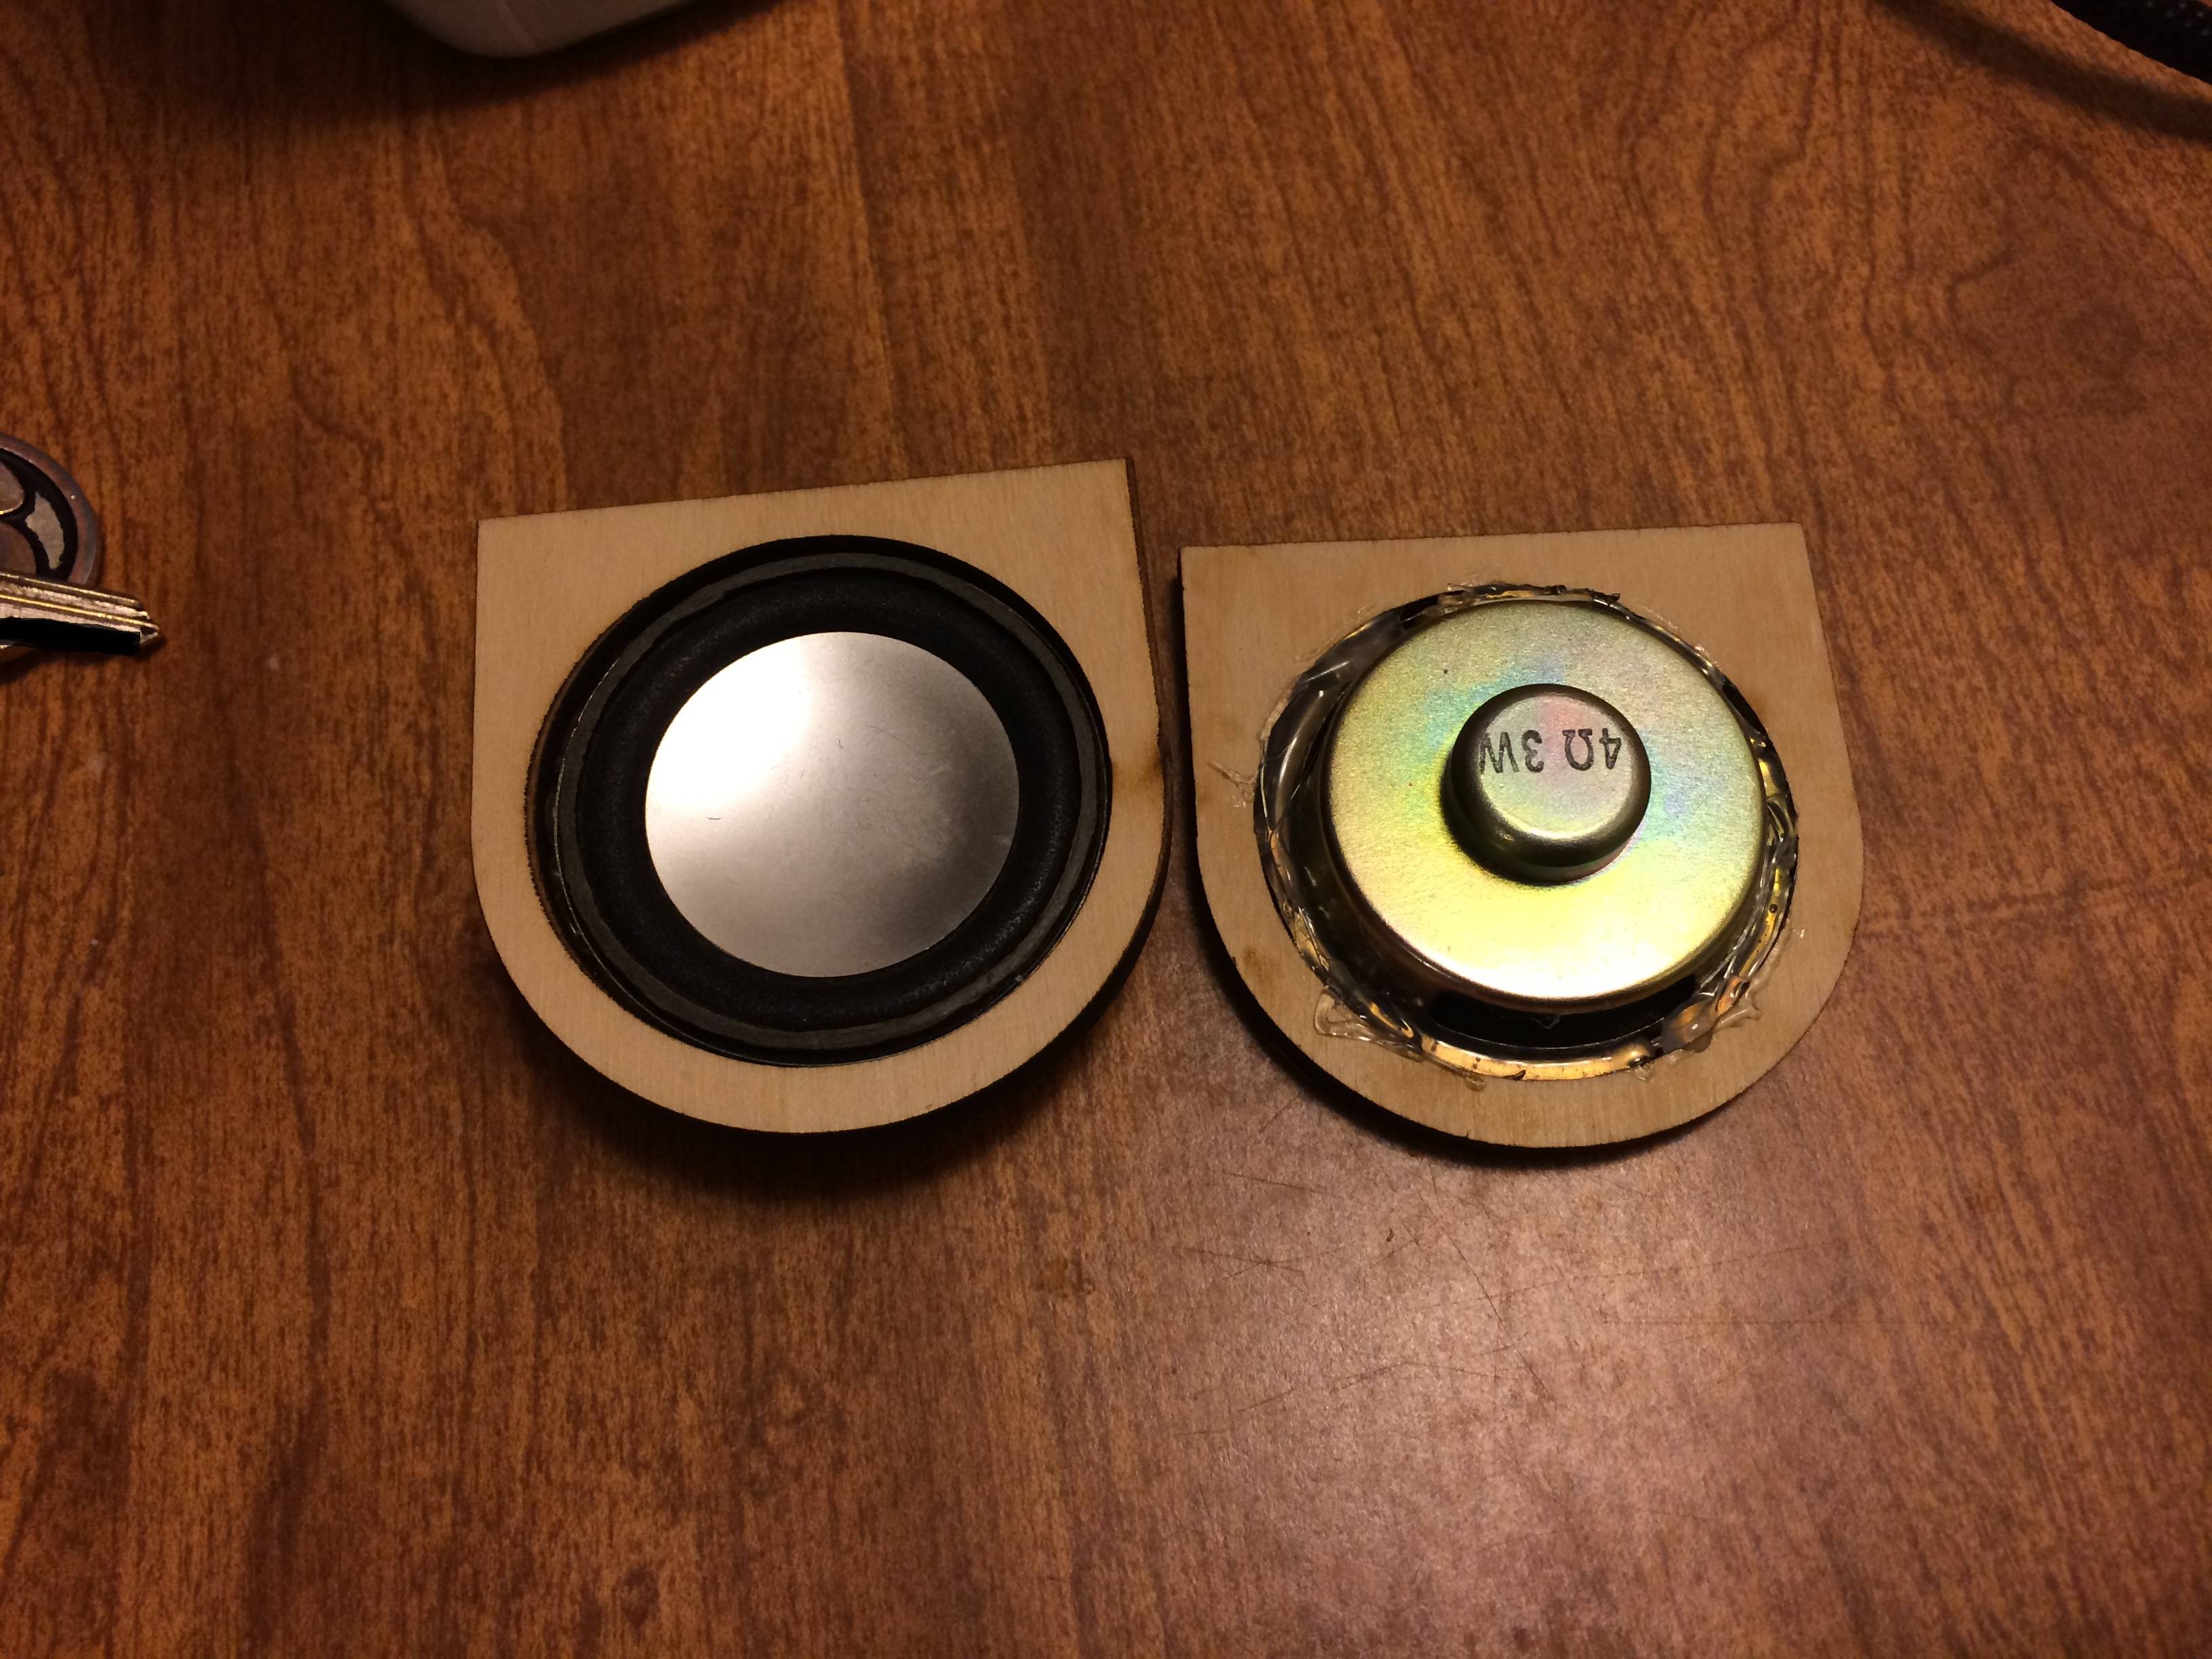 Here are the little circle things I had laser cut, and then hot glued the speakers into.